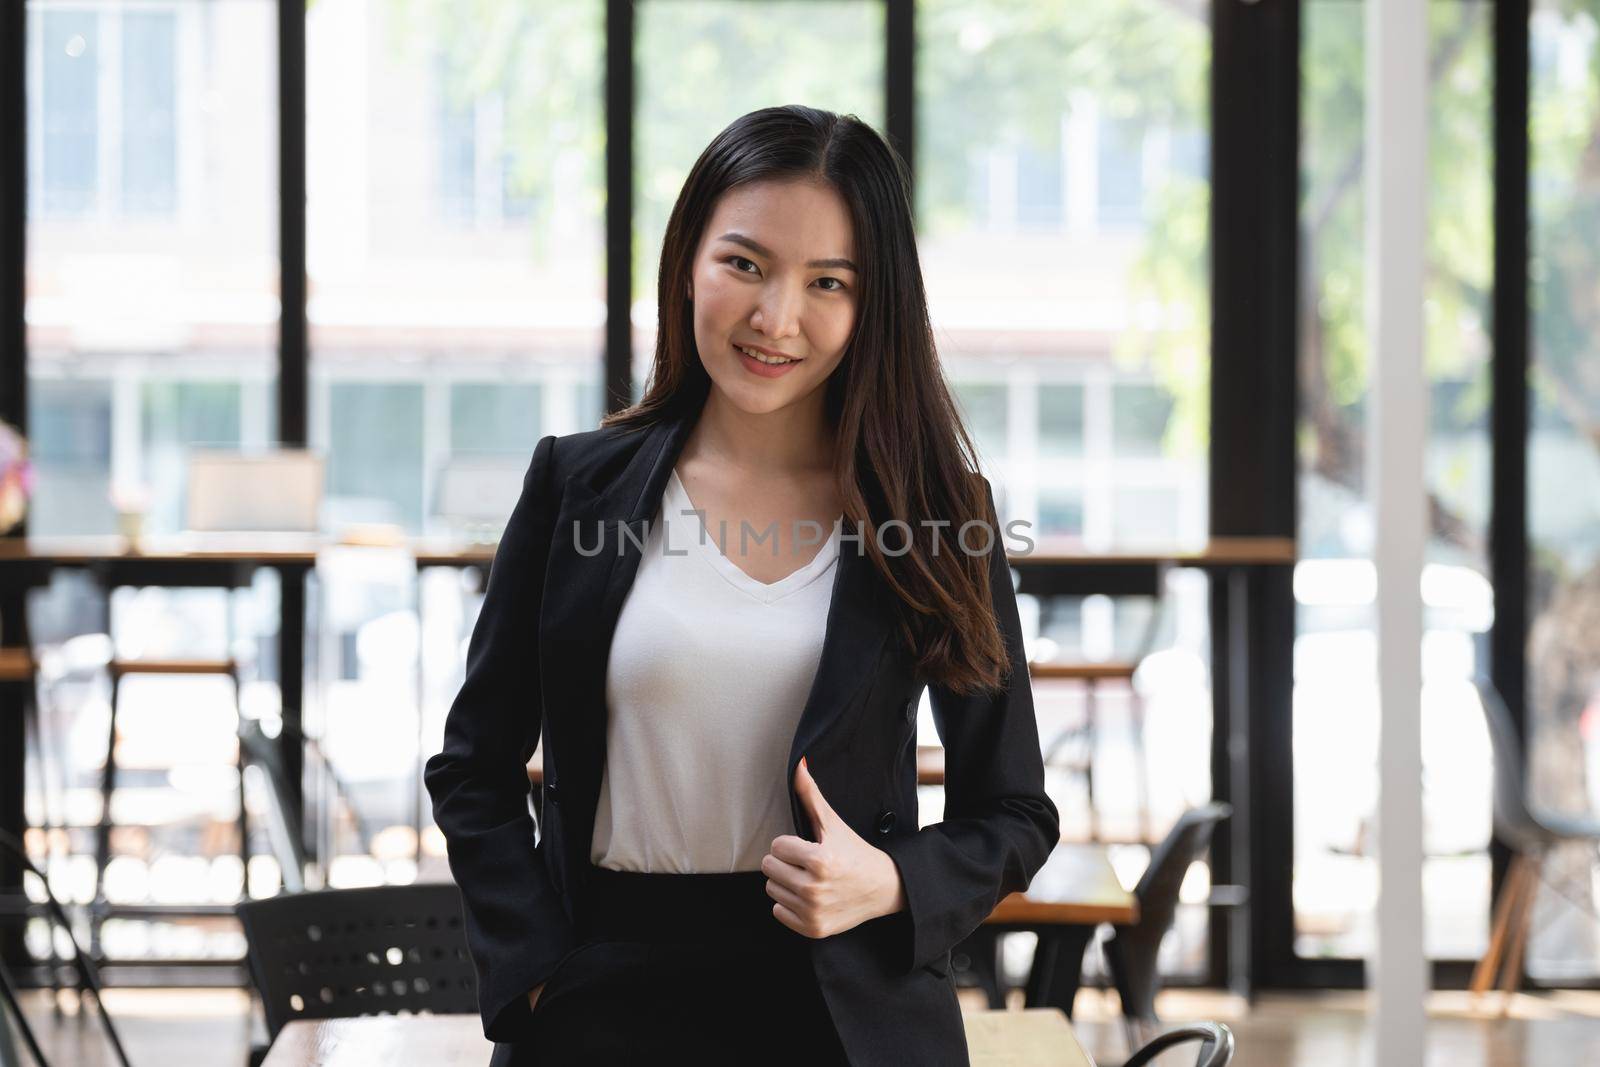 A successful organization as a manager is represented by a happy entrepreneur or businesswoman. by itchaznong